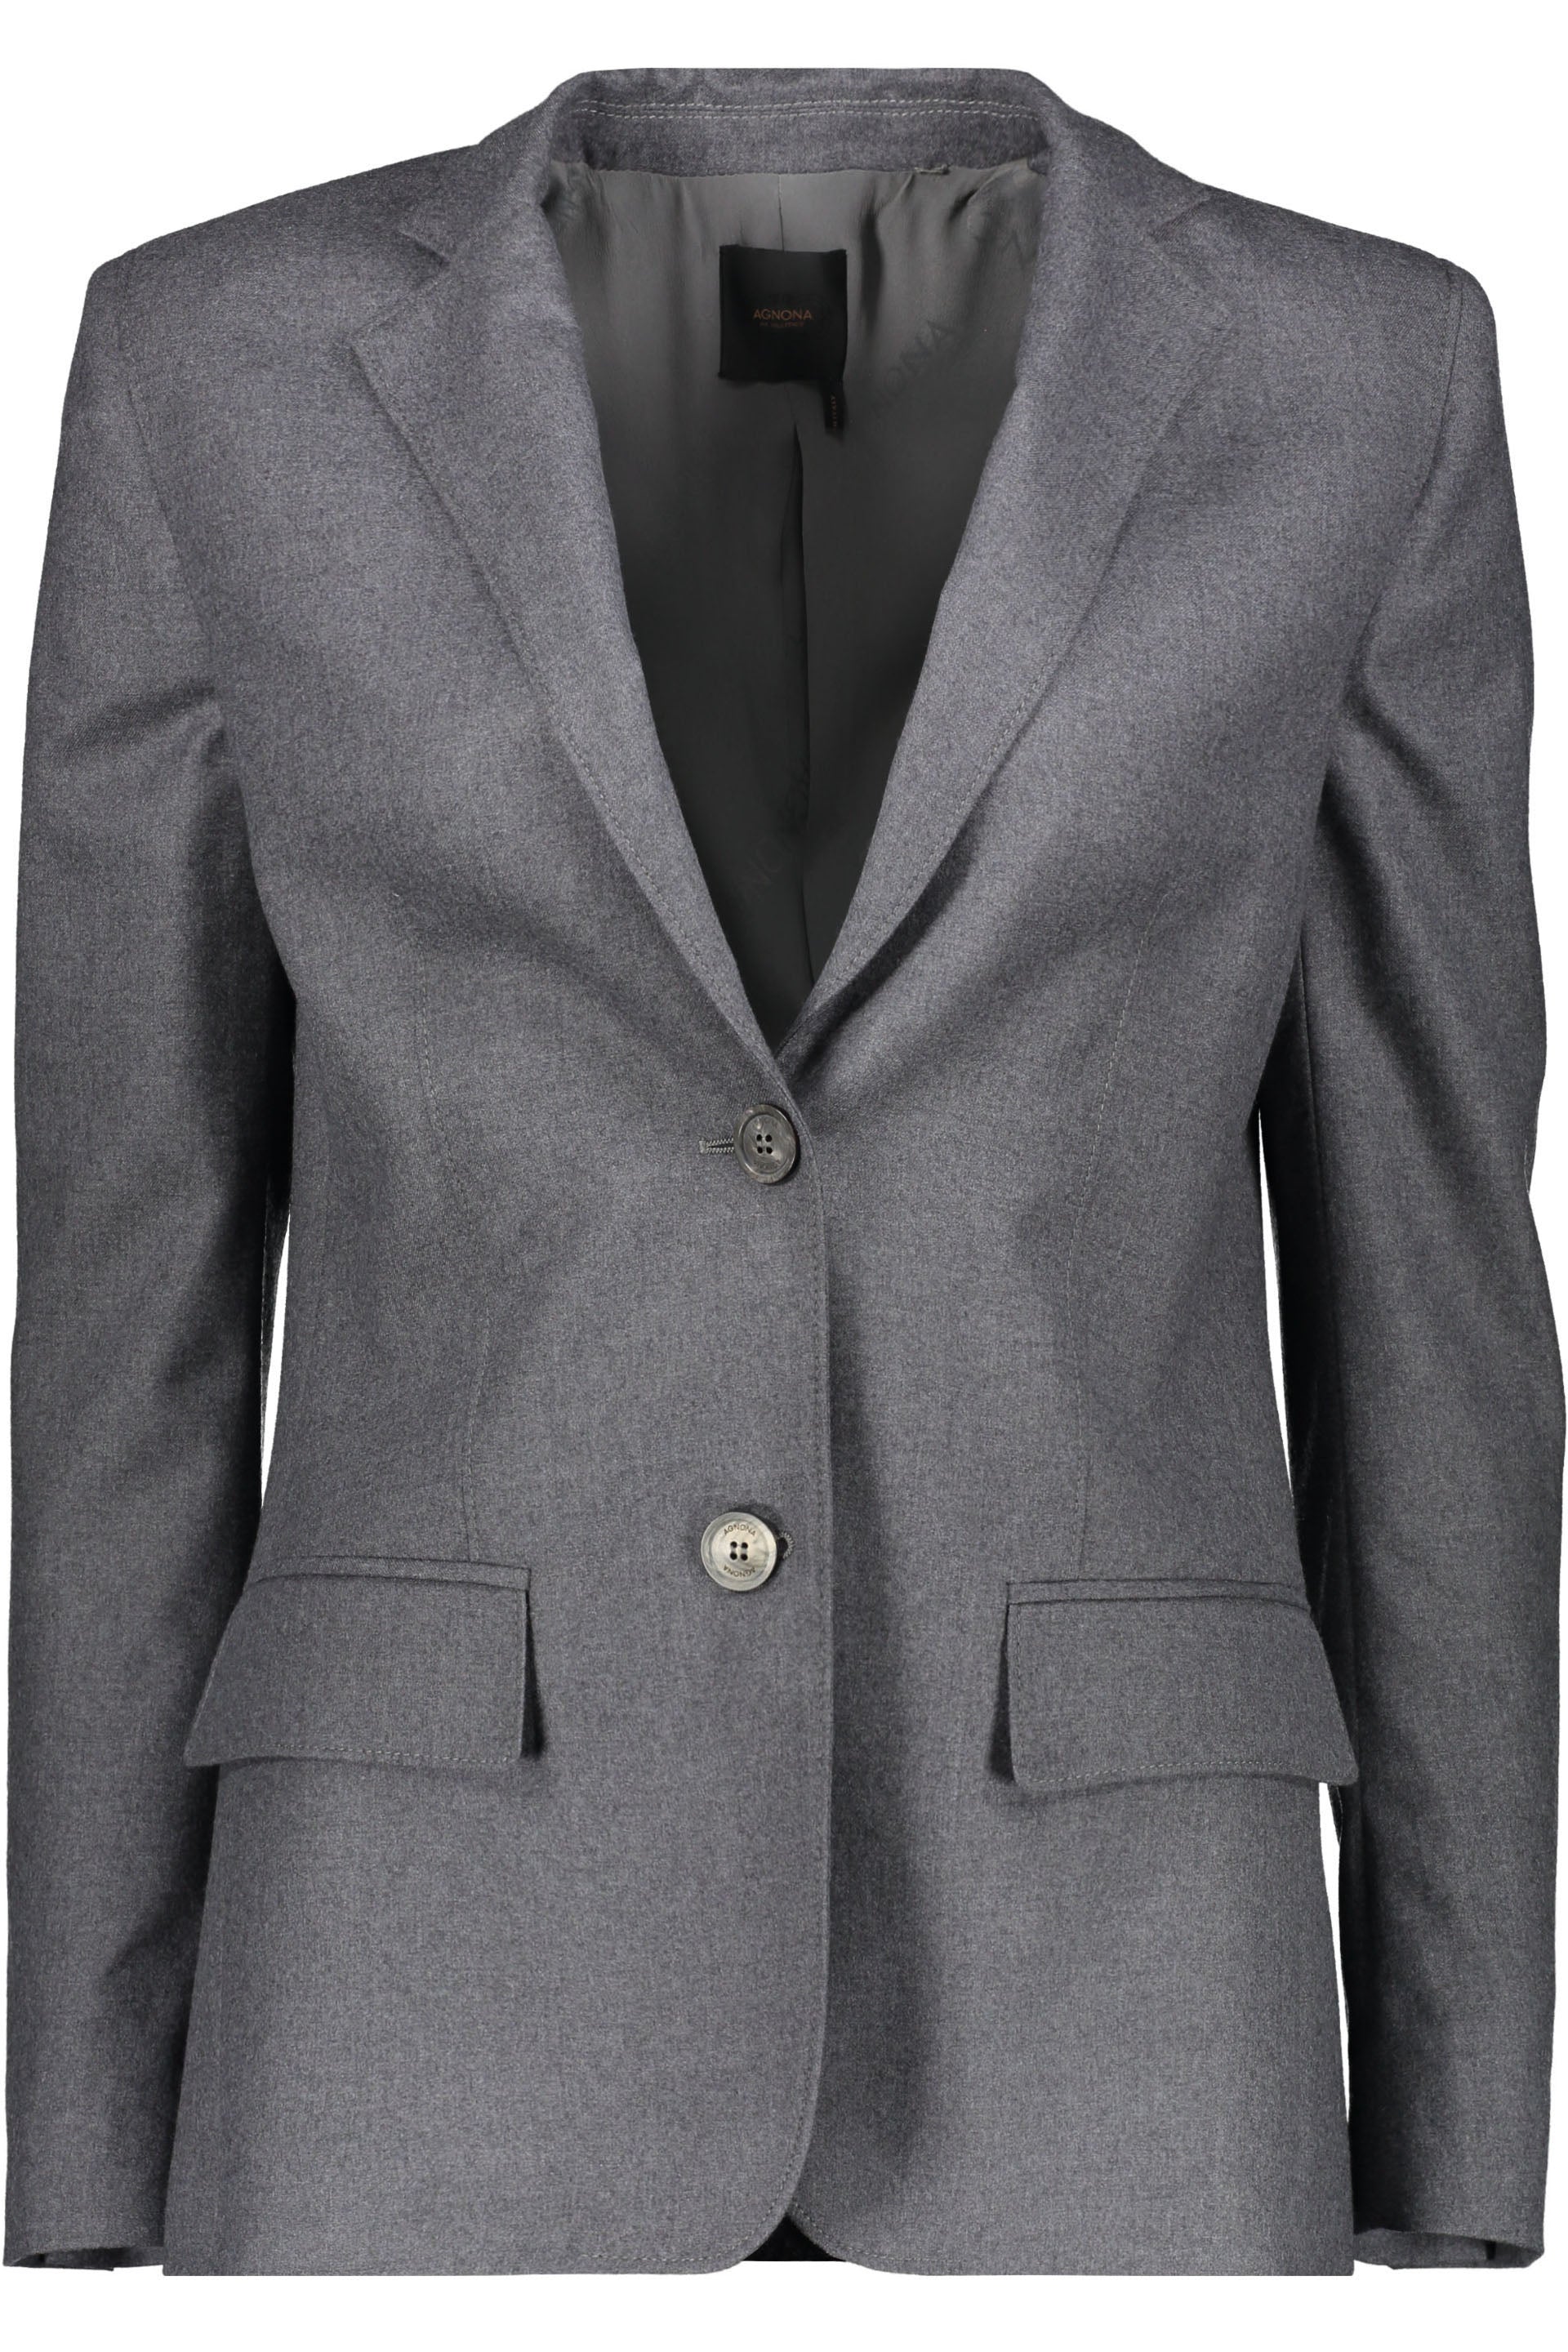 Agnona-OUTLET-SALE-Wool-single-breasted-blazer-Jacken-Mantel-ARCHIVE-COLLECTION-2.jpg